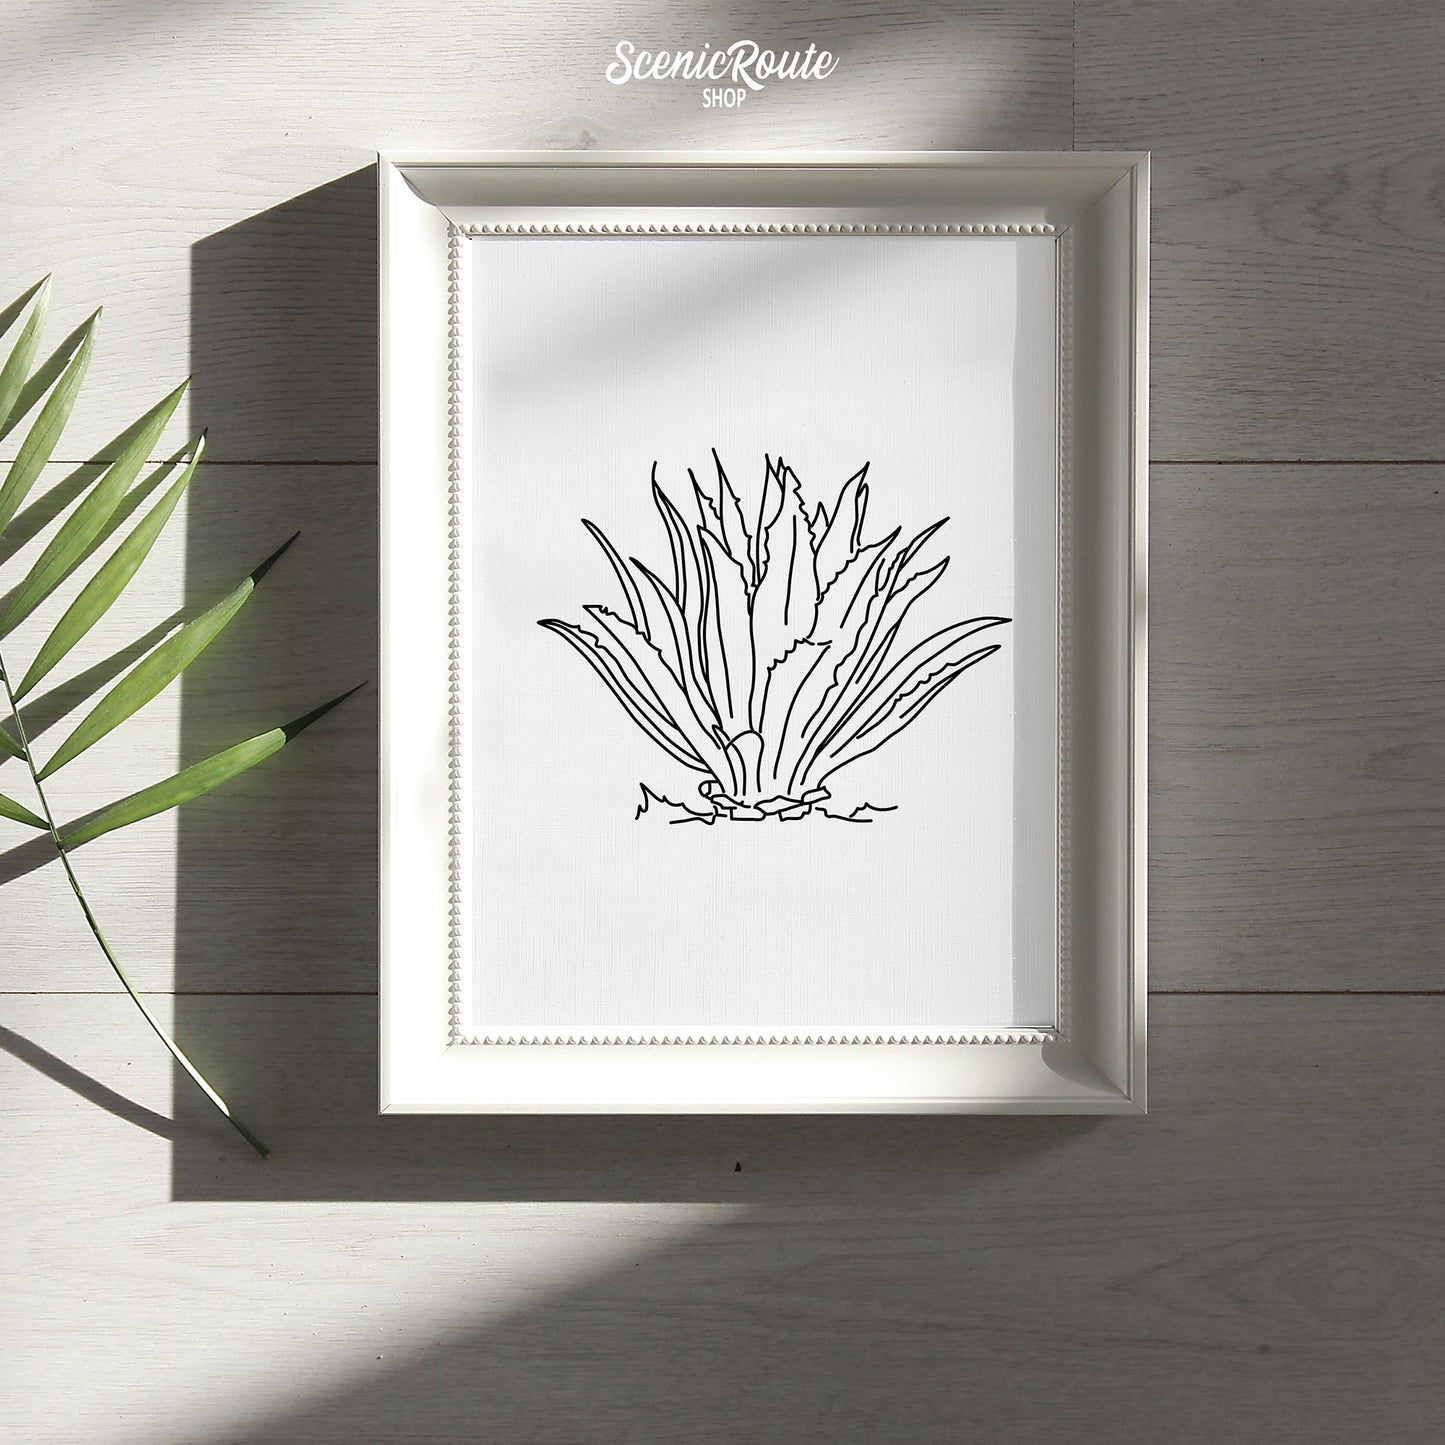 A framed line art drawing of an Agave Cactus on a wood table with palm frond